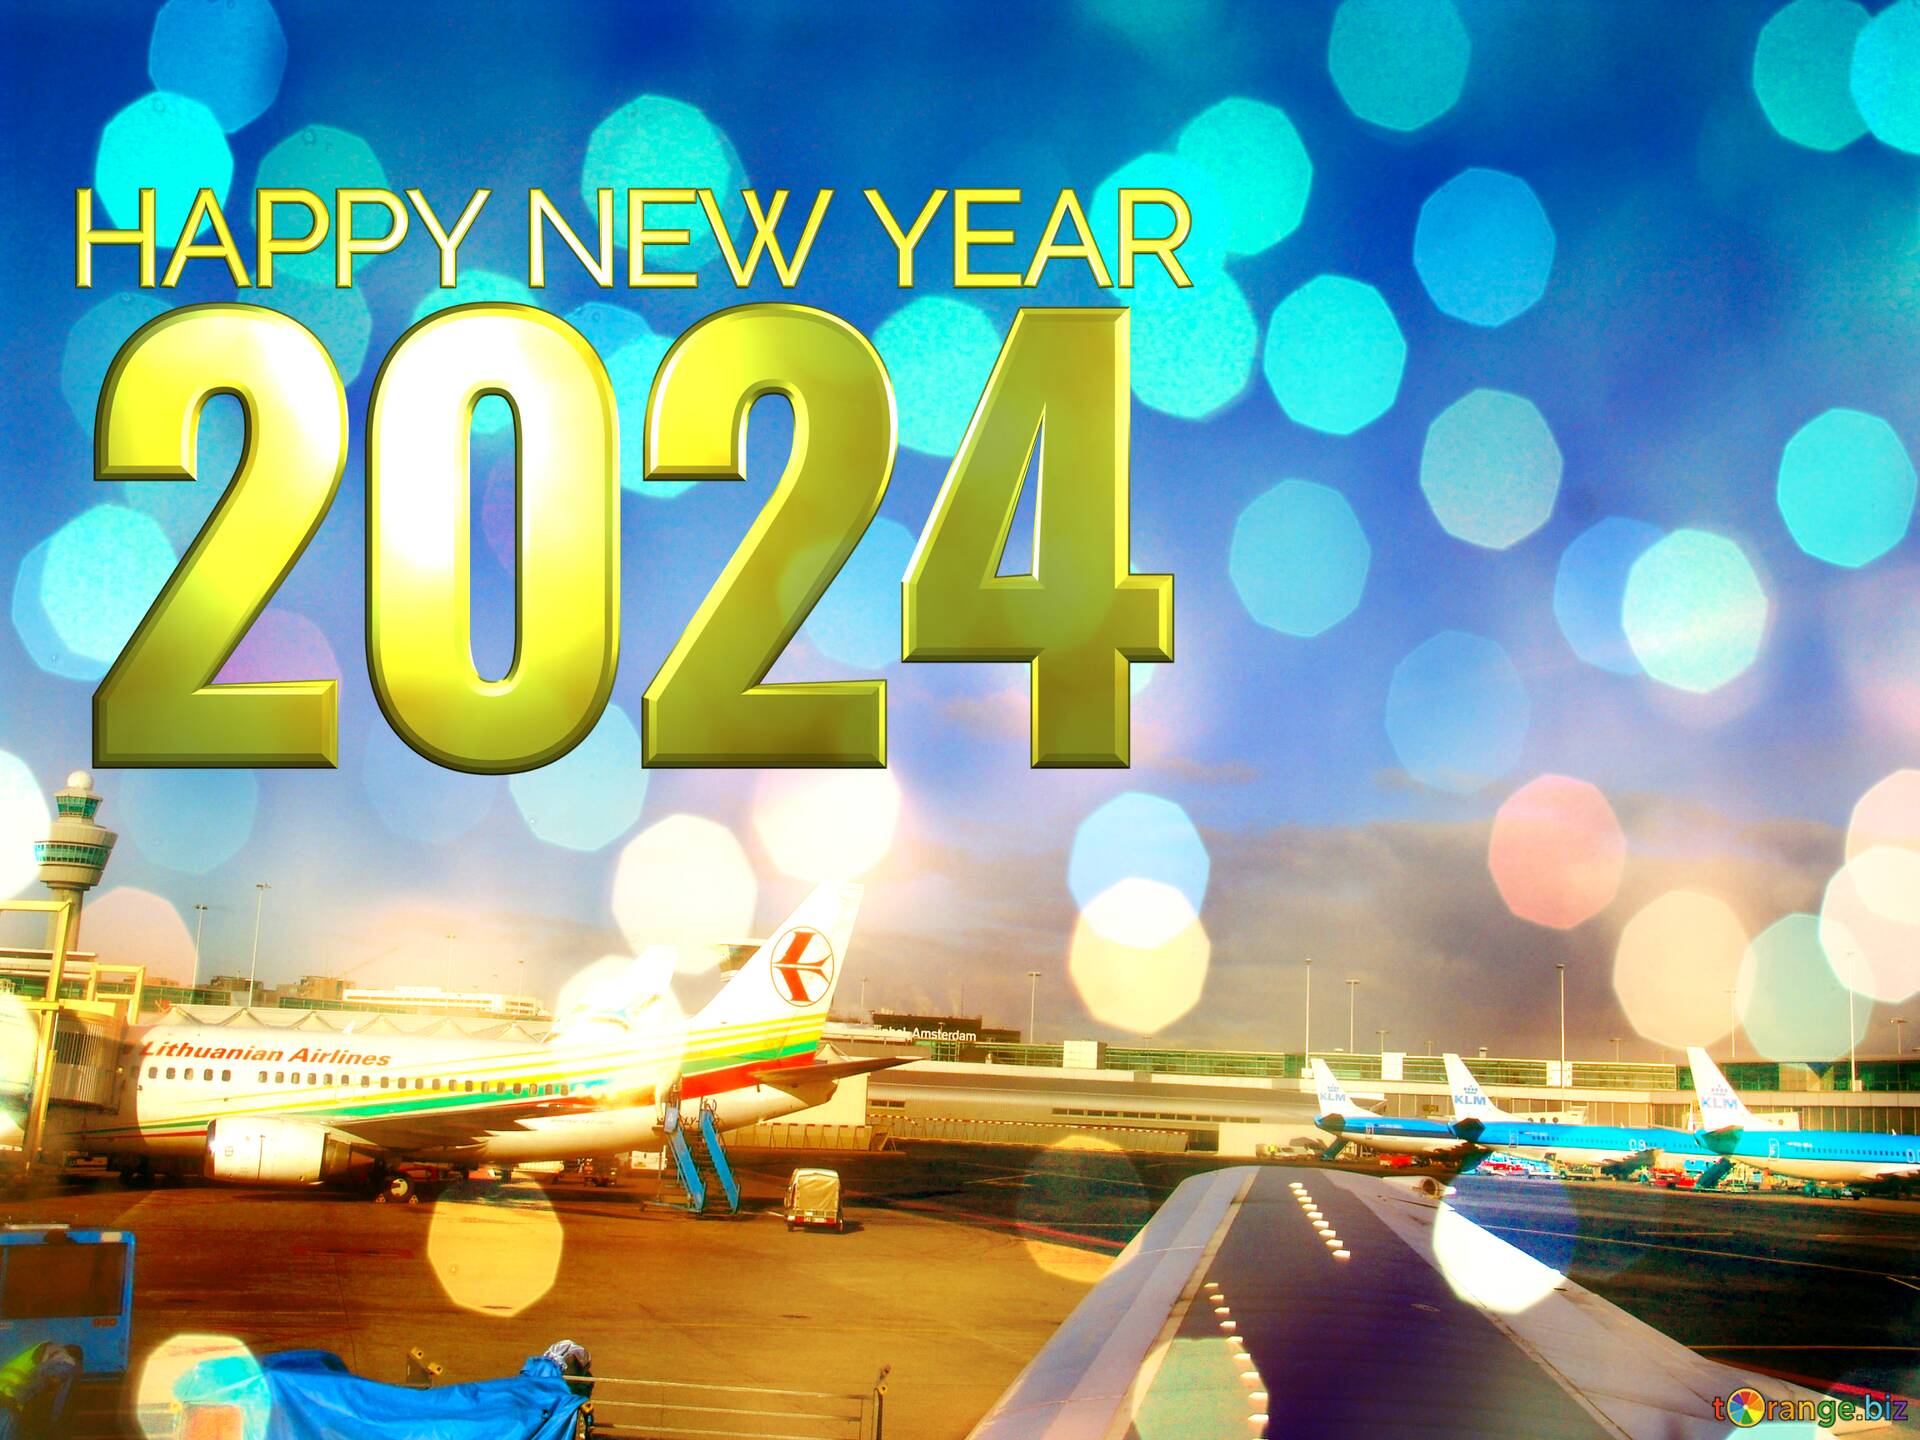 Aircraft Background Card Happy New Year 2024 Merry Christmas №178899